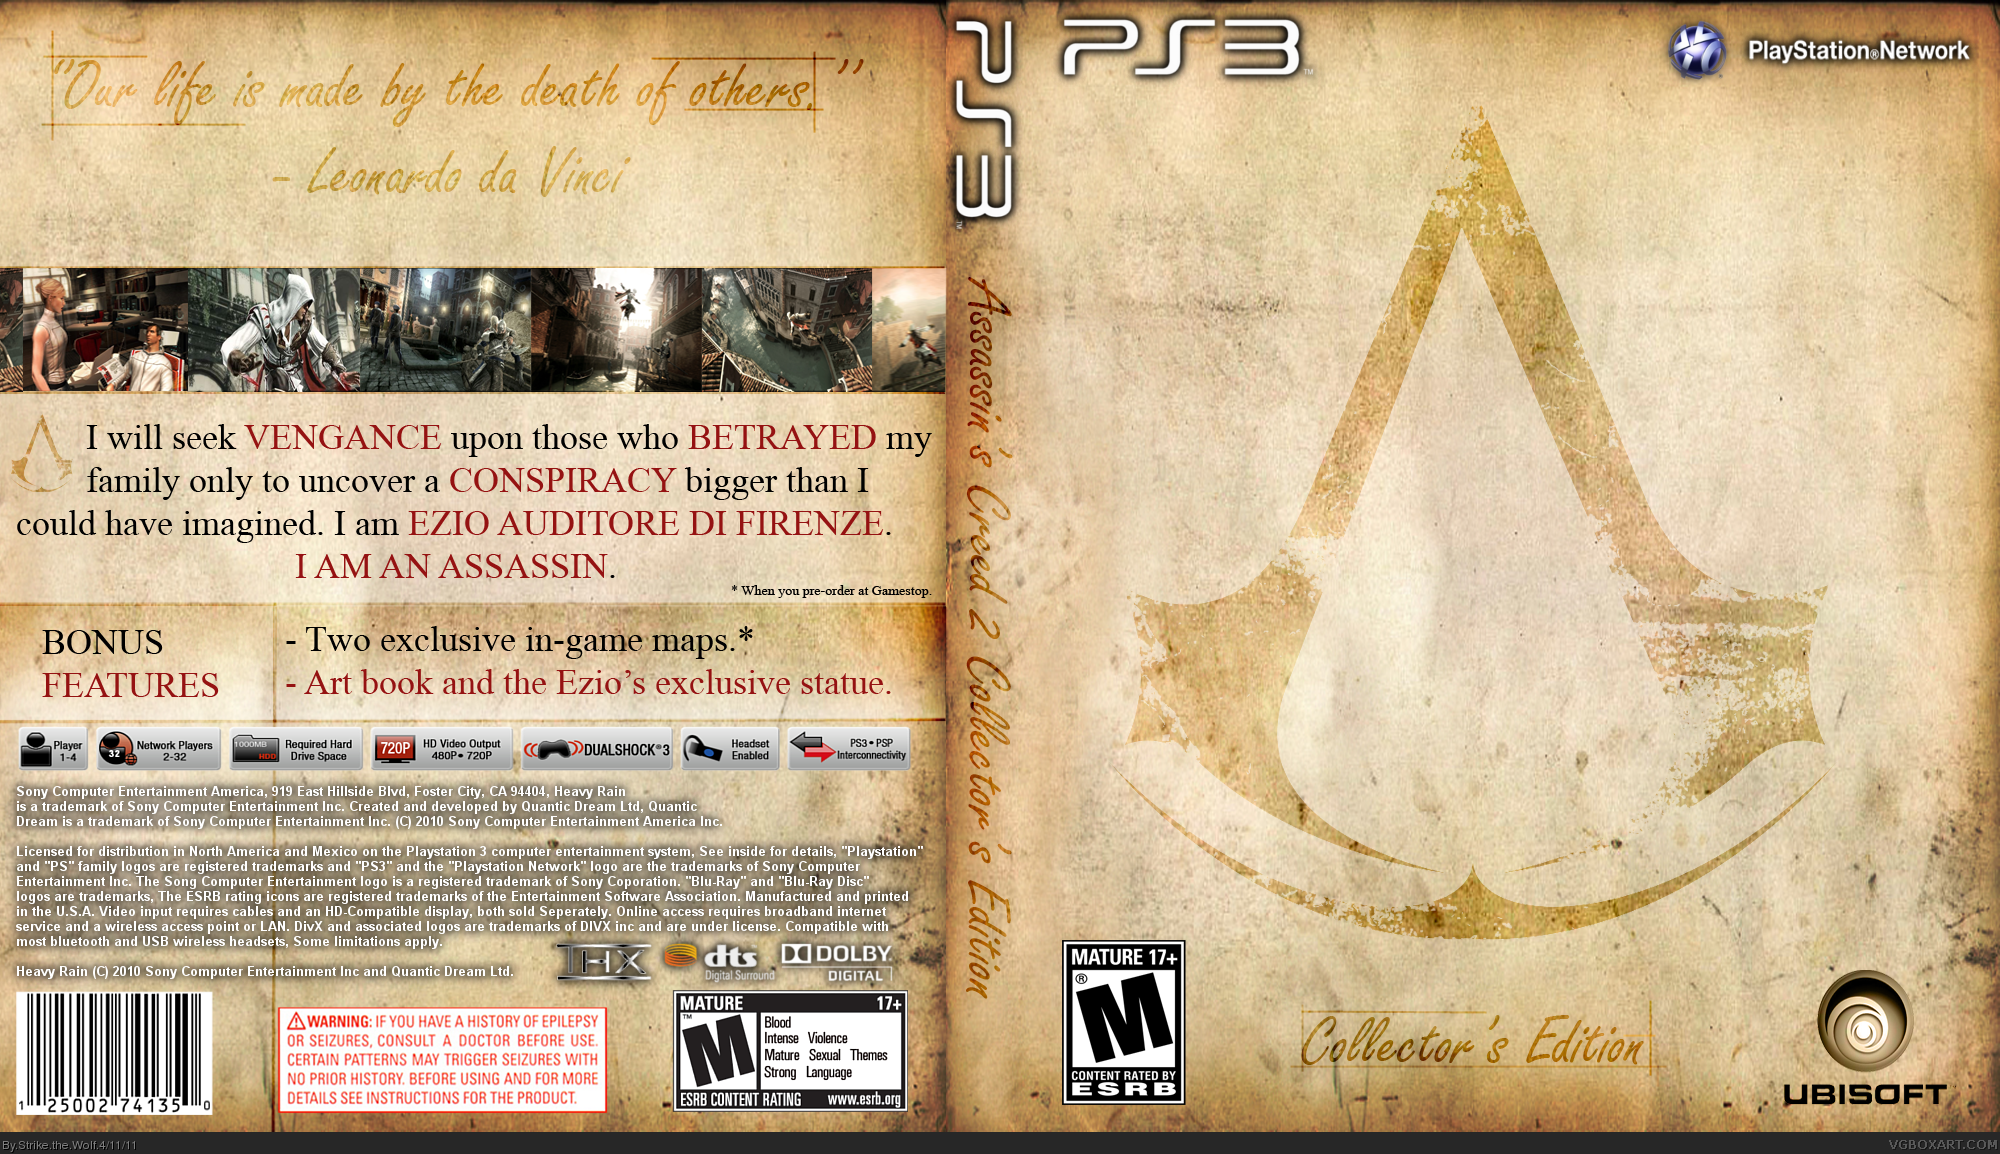 Assassin's Creed 2 Collector's Edition box cover